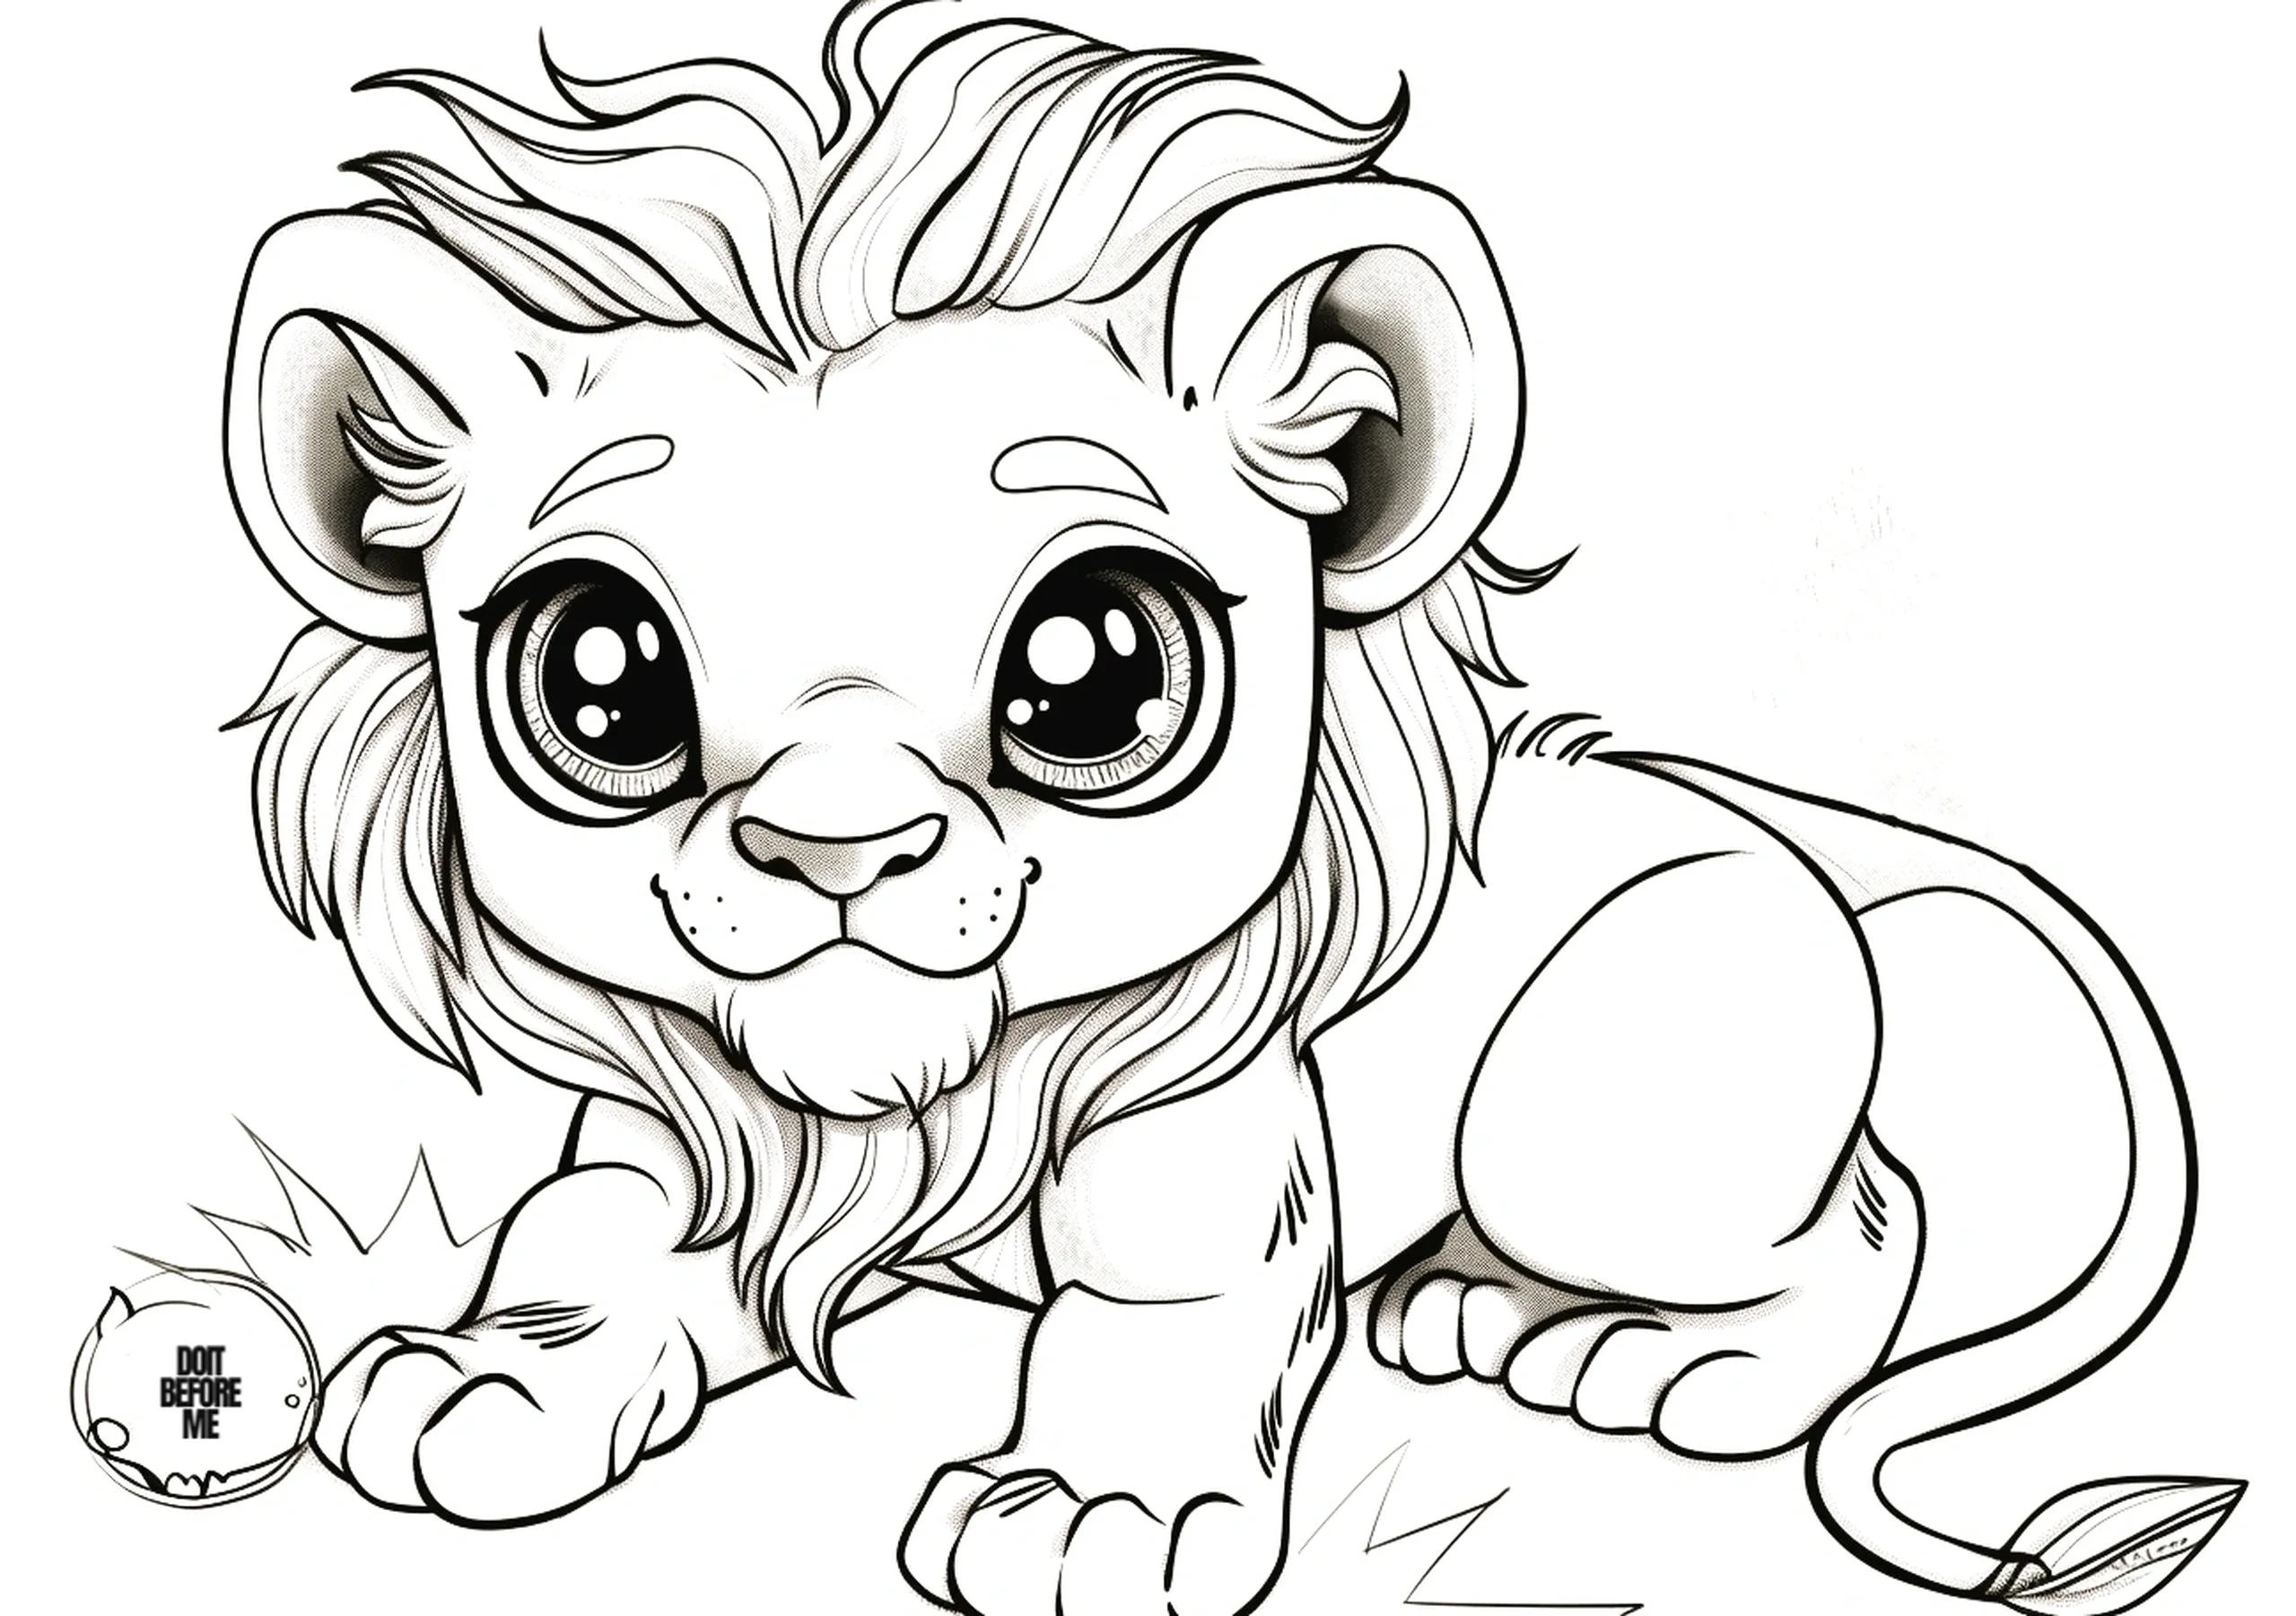 Easy coloring page of a cute male baby lion cub with big eyes, designed for children to color easily.